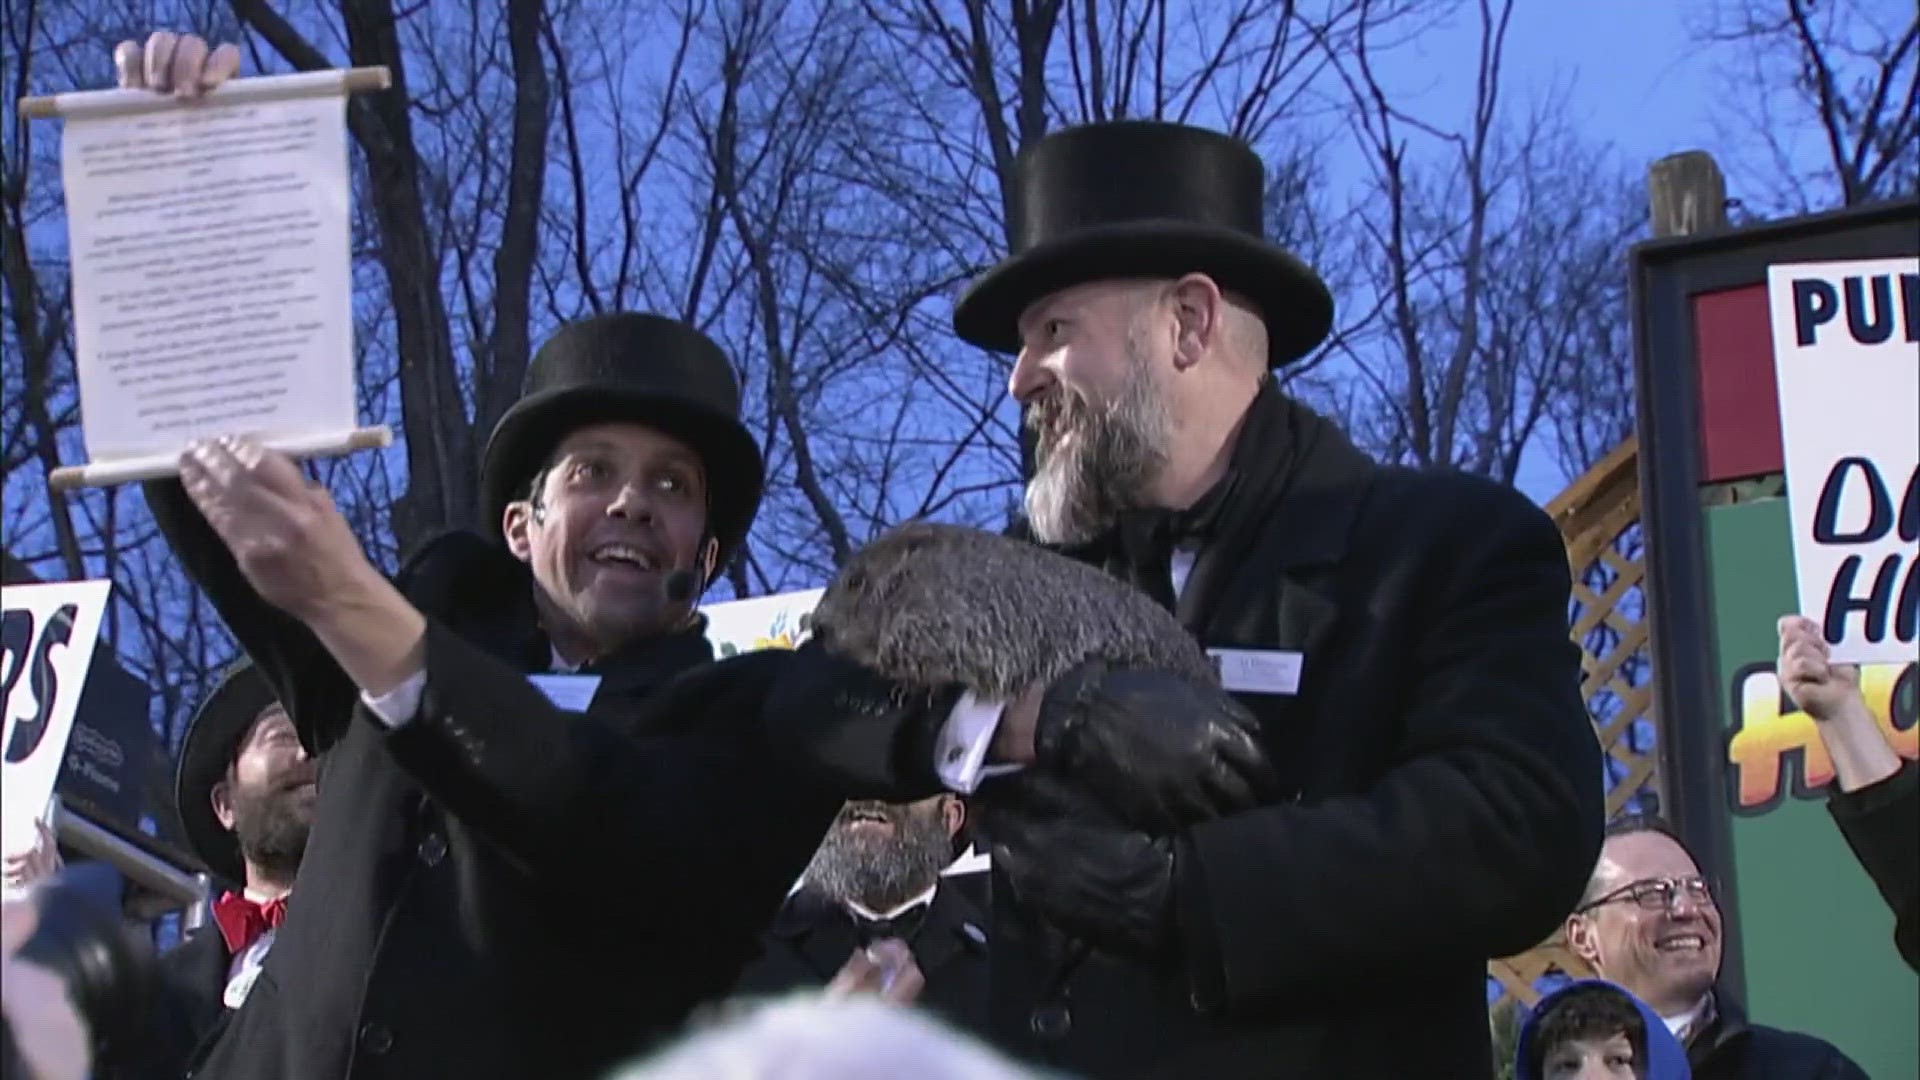 According to legend and tradition, we can expect an early spring if Punxsutawney Phil does not see his shadow on Groundhog Day every February 2.